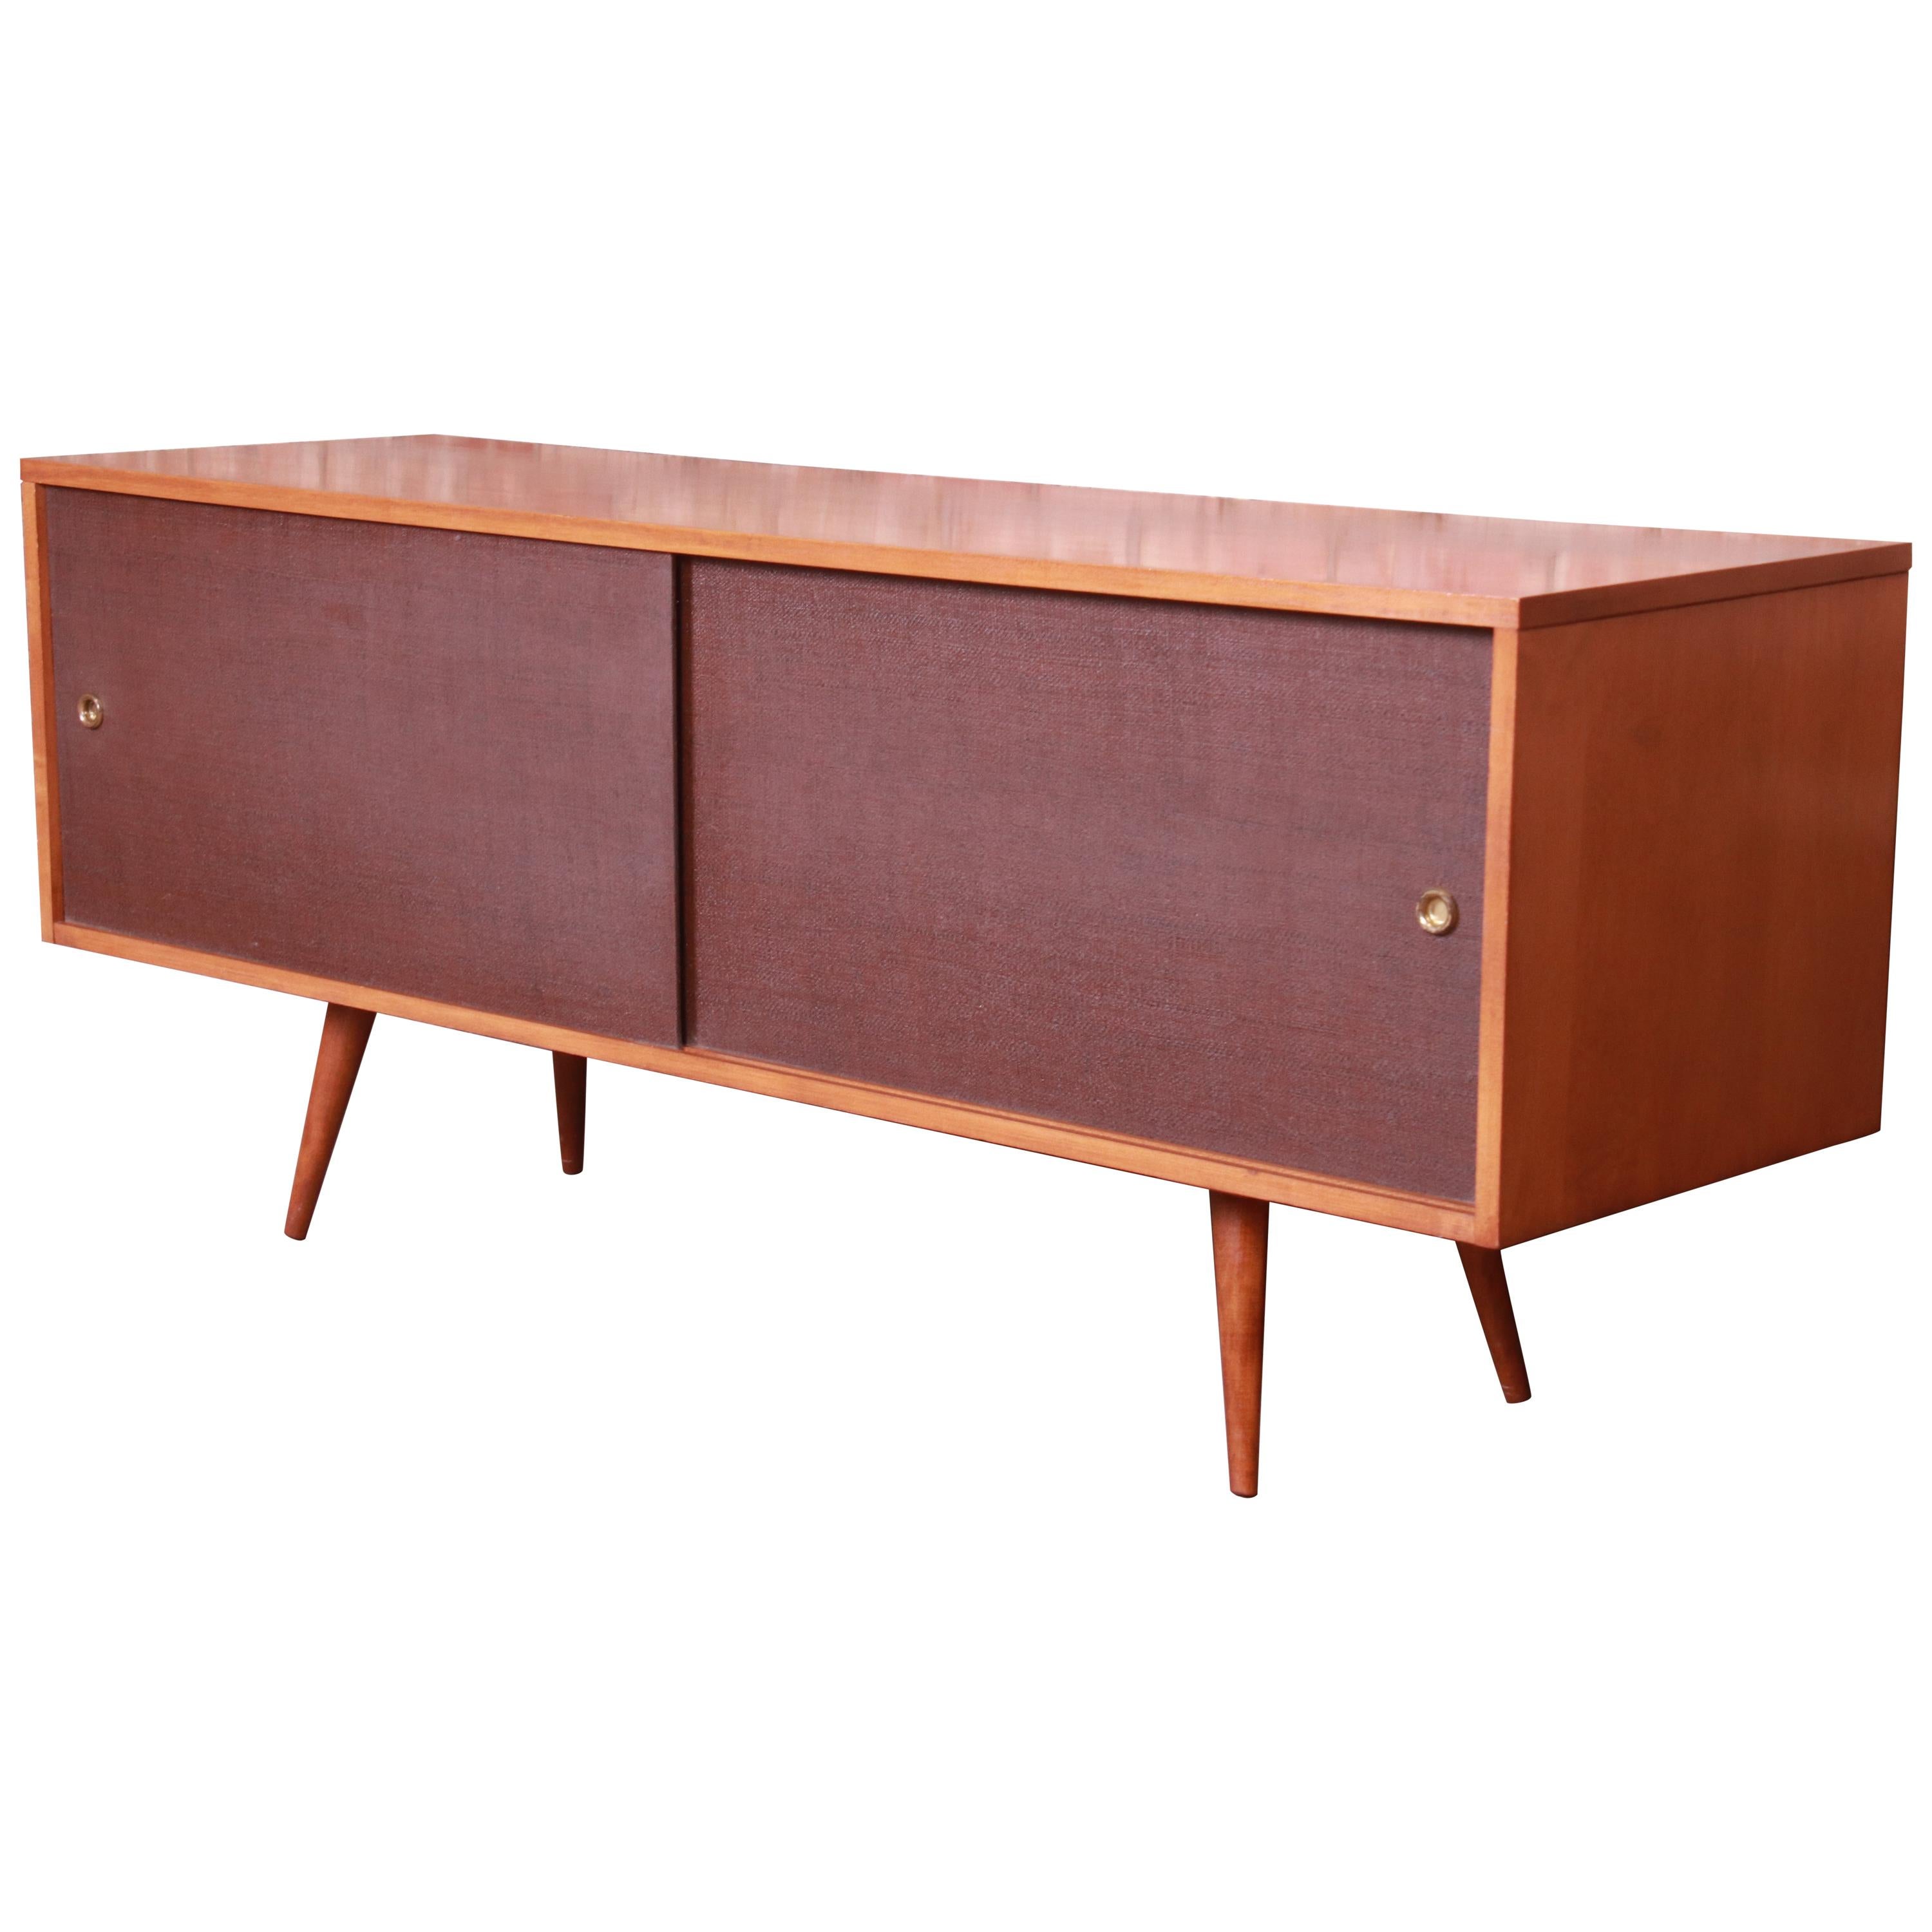 Paul McCobb Planner Group Mid-Century Modern Credenza or Record Cabinet, 1950s